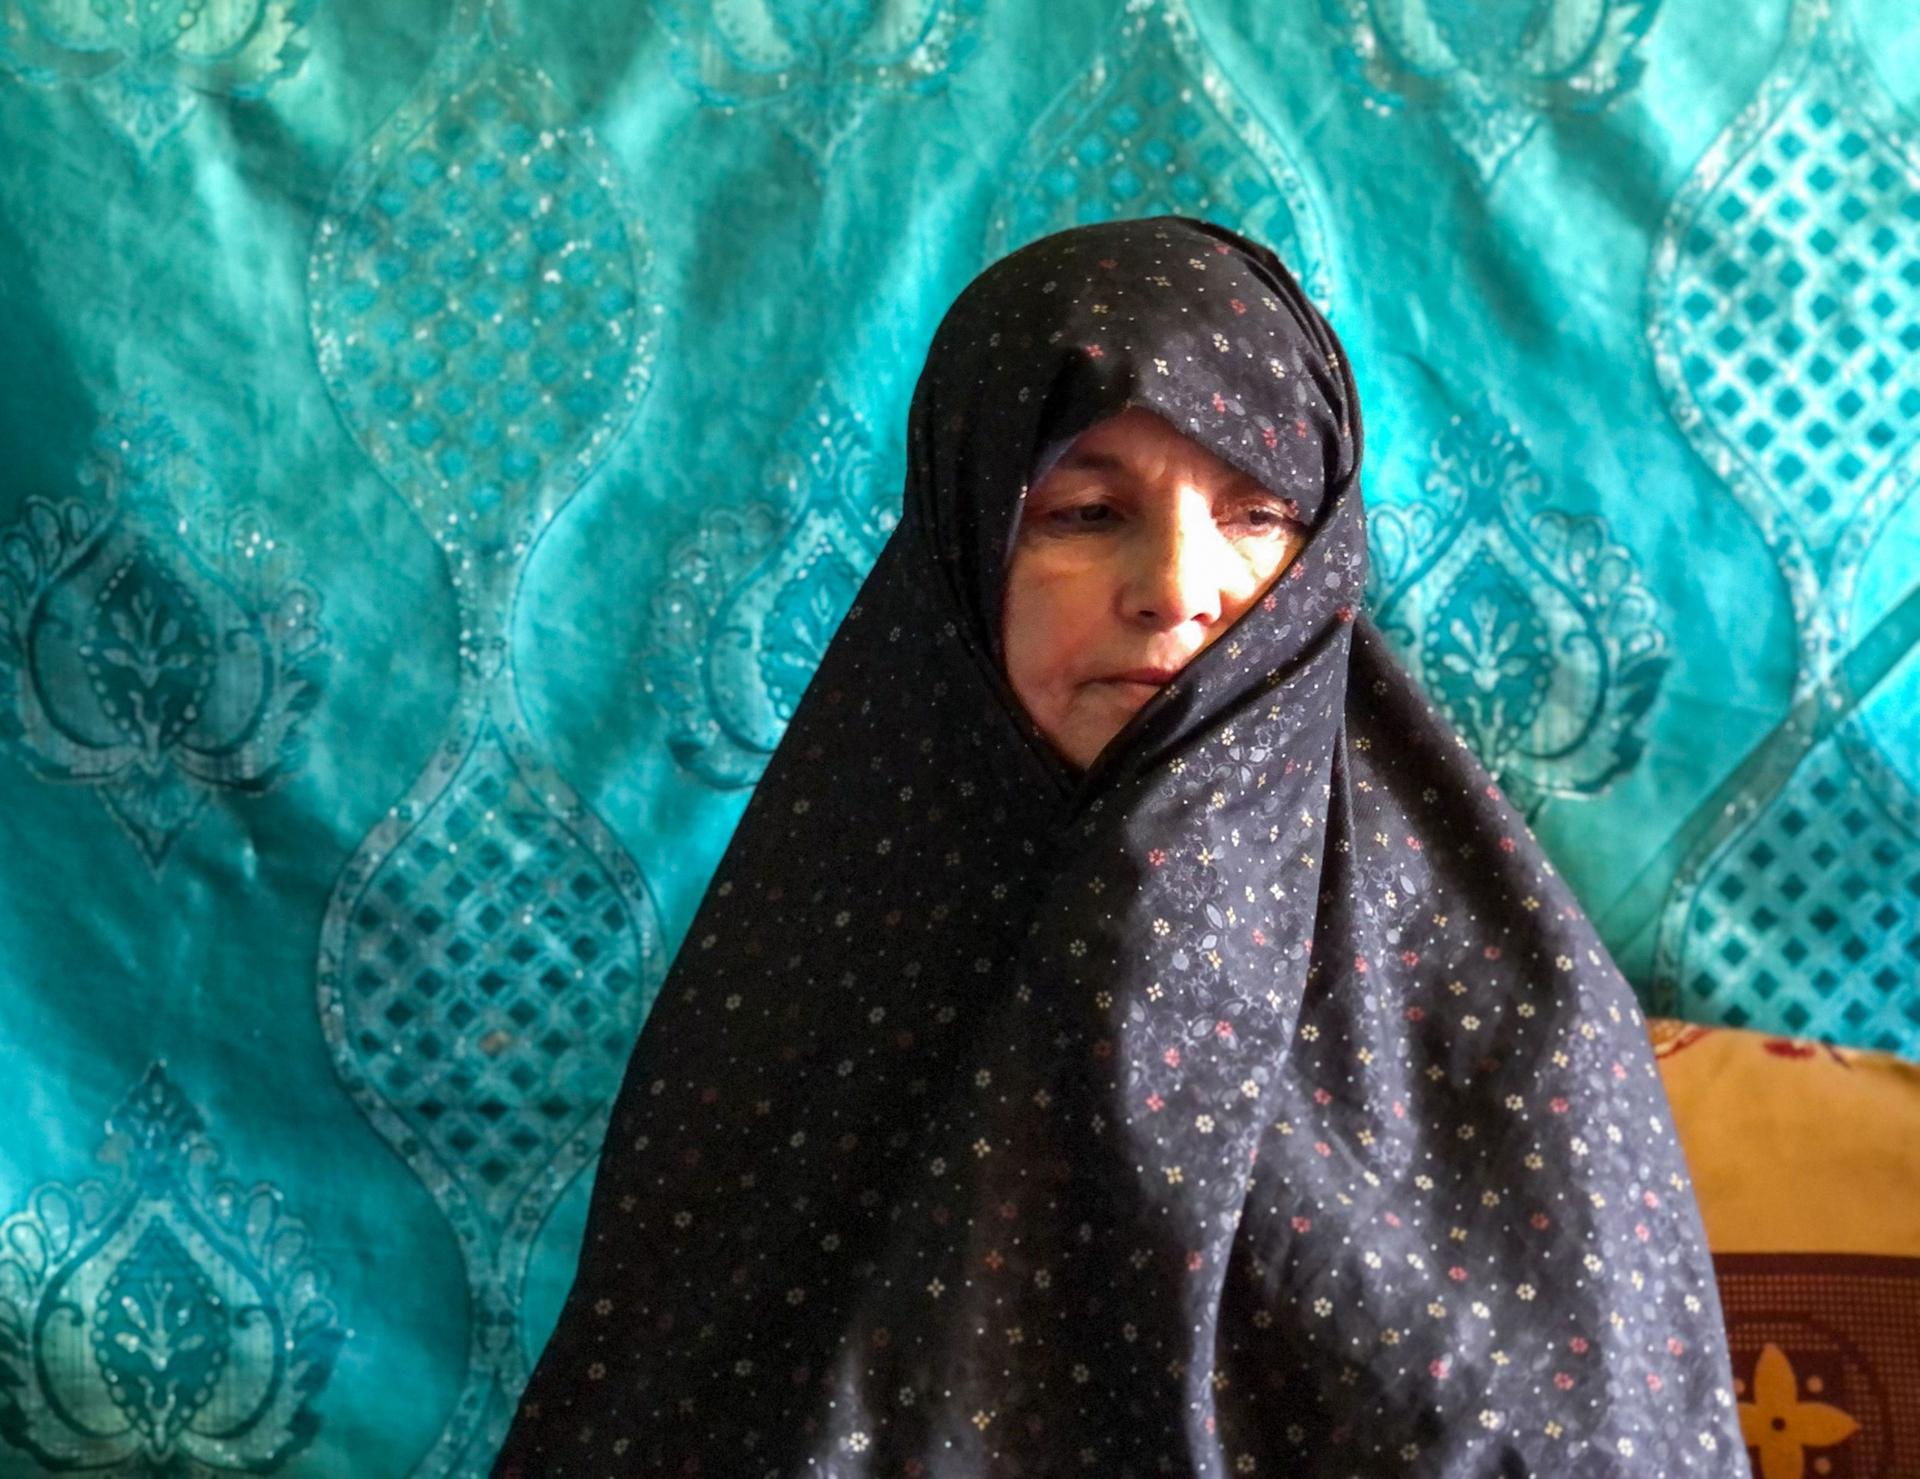 Fatimeh, 45, had to flee her home in Ghaleh-Now in western Afghanistan because the Taliban entered her city. Her home ended up being on the front lines, she said, and she had to leave with only the clothes on her back.